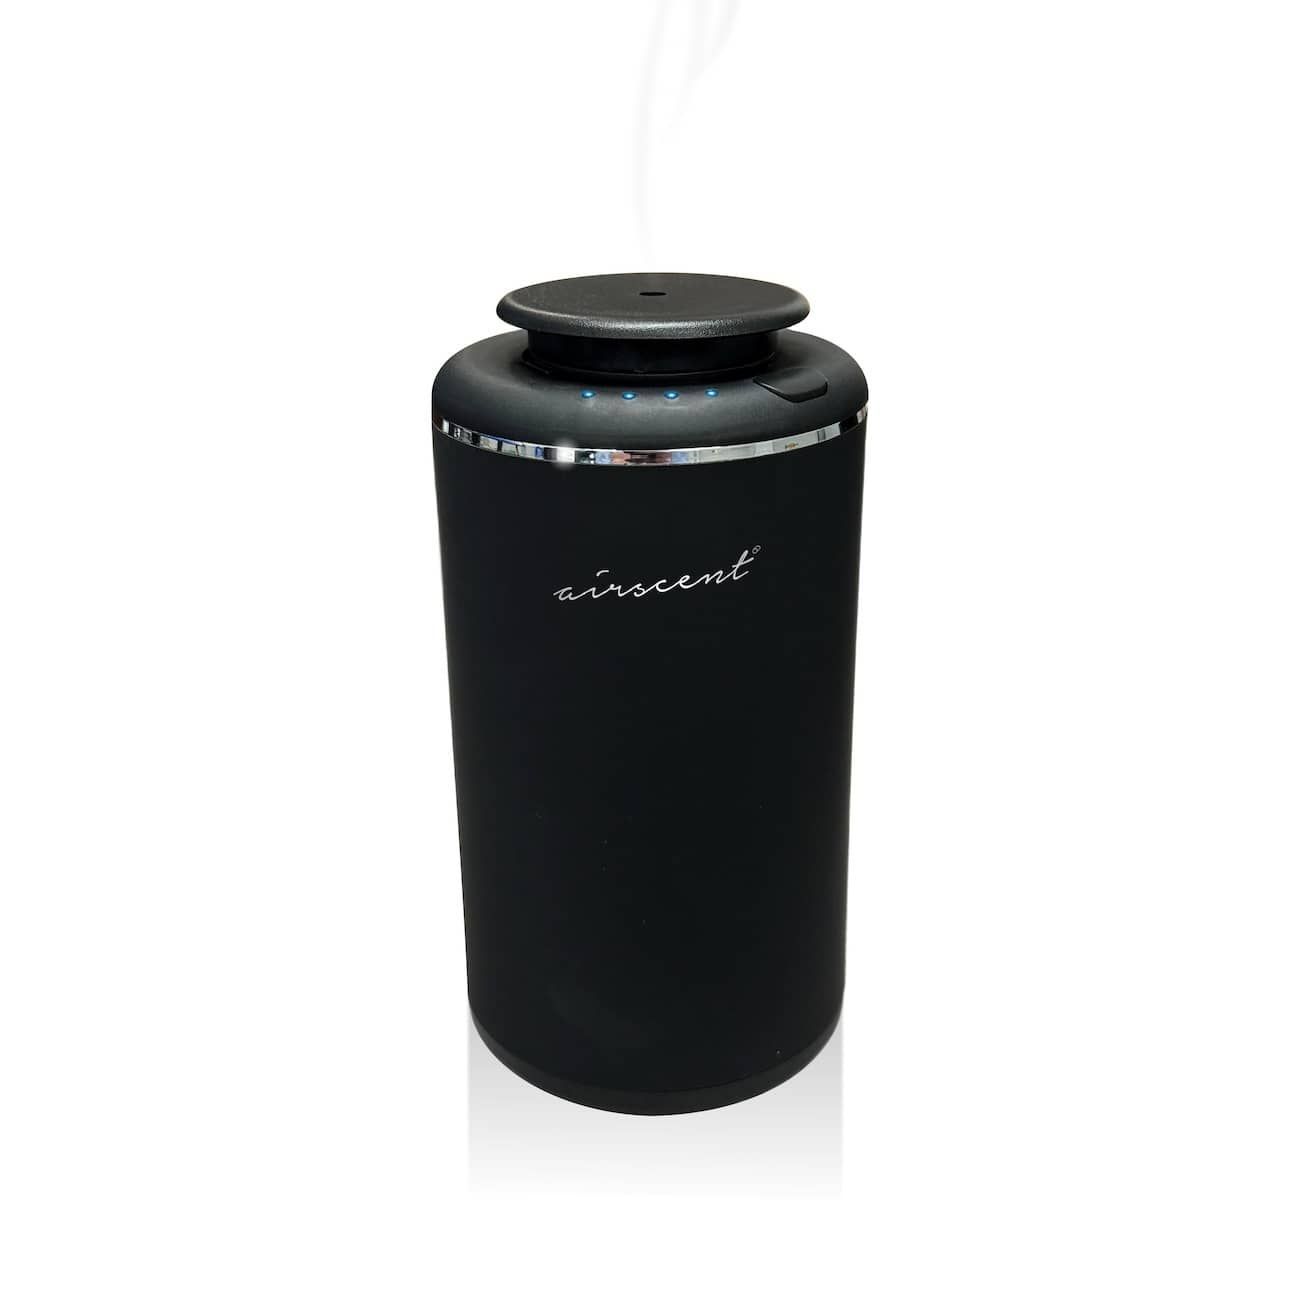 Waterless Small Room Car Diffuser for Essential Oils